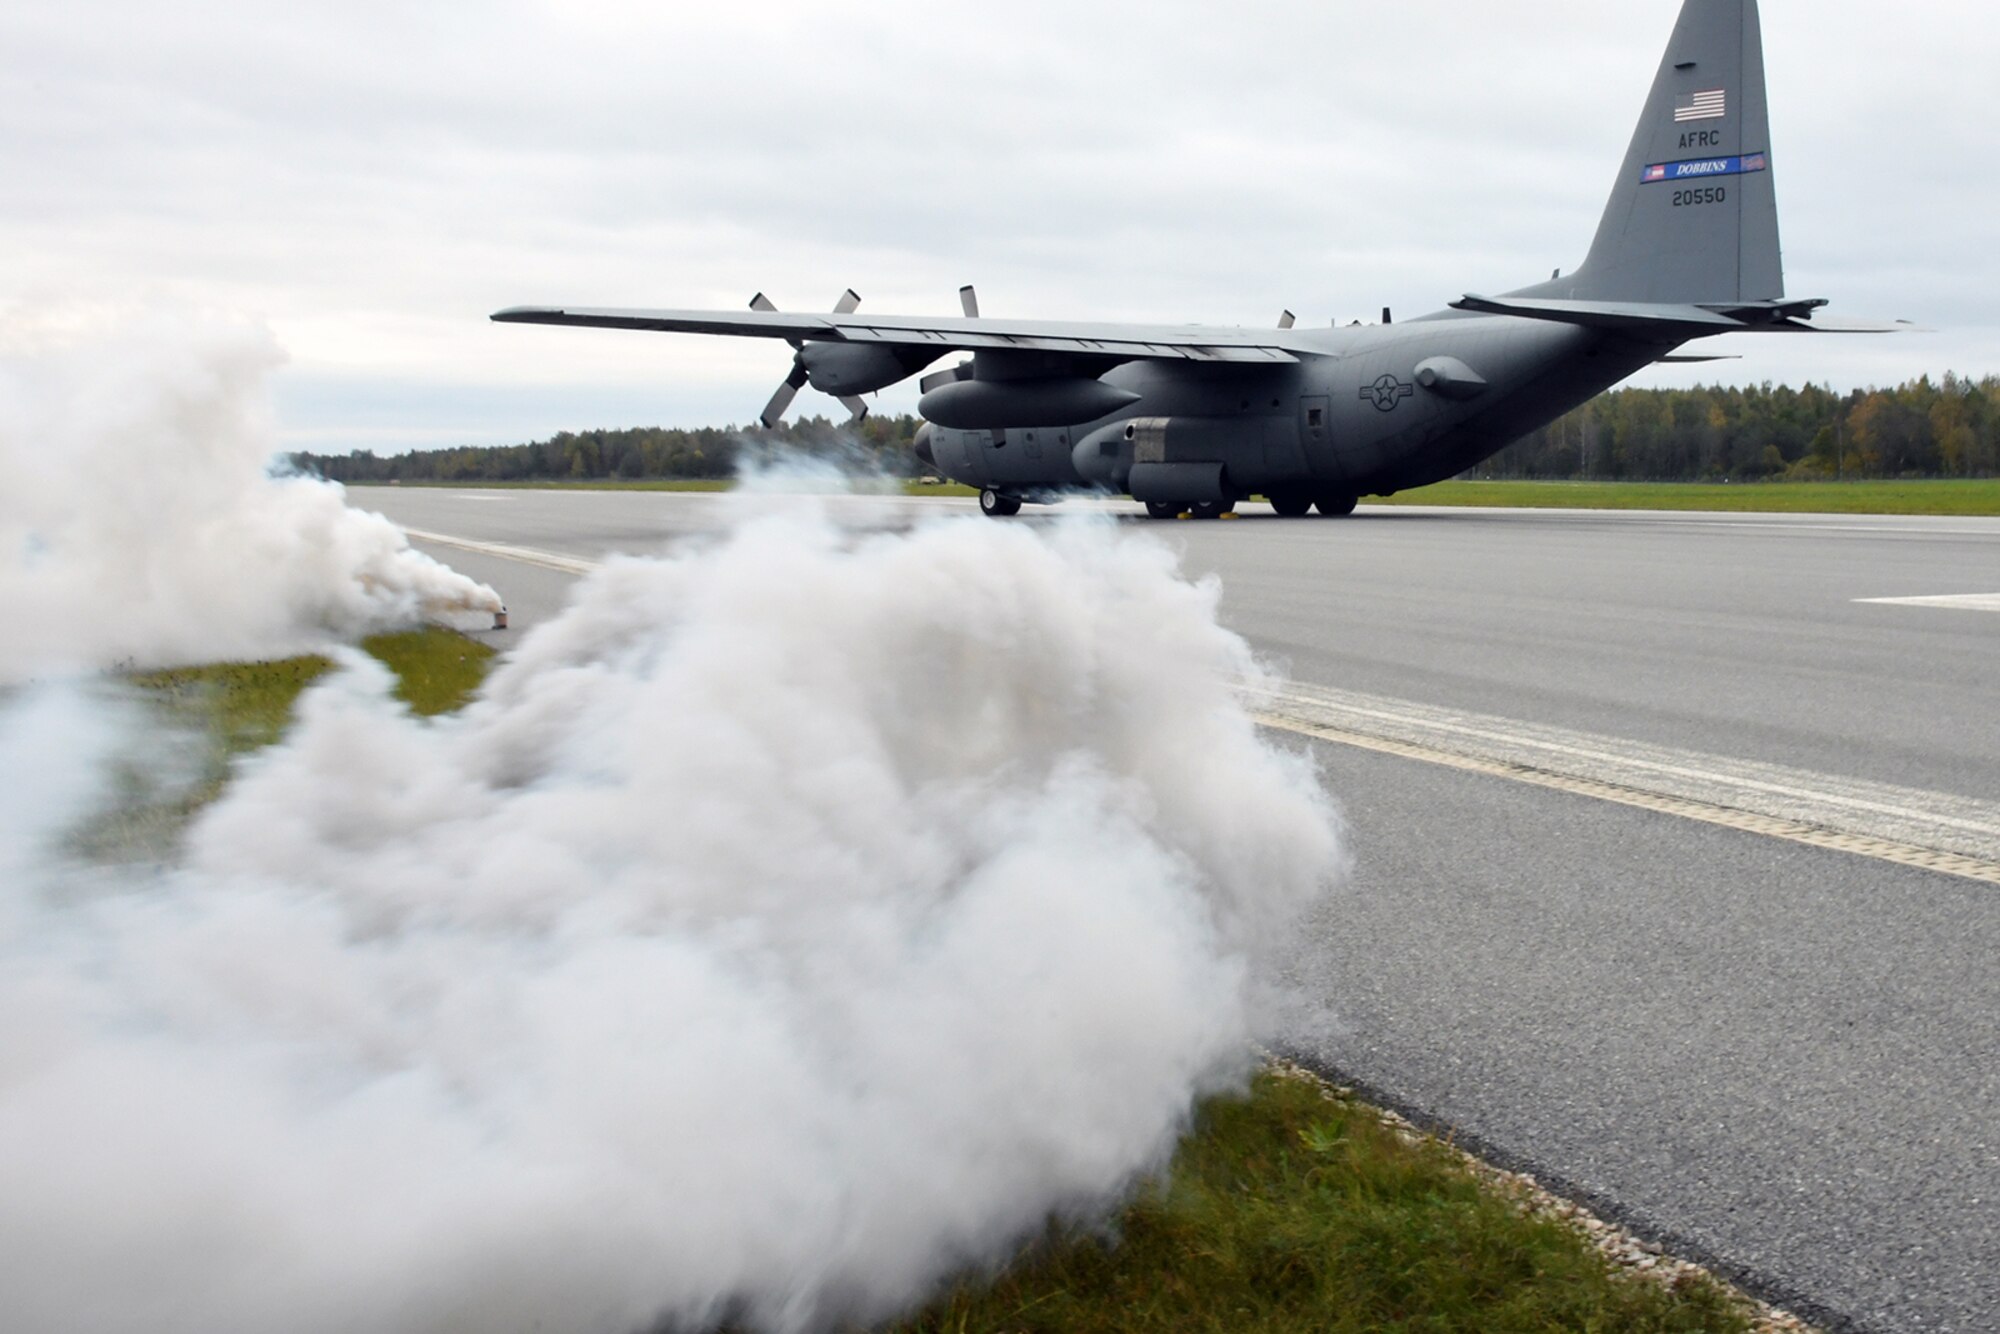 A C-130H from the 94th Airlift Wing, Dobbins Air Reserve Base, Ga., is positioned on the runway in a simulated crash at Lielvarde Air Base, Latvia, during Sky Fist, Oct. 6, 2016. Sky Fist was a bilateral aircraft mishap training exercise designed to strengthen the partnership between the U.S. and Latvia. (U.S. Air Force photo by Staff Sgt. Alan Abernethy)